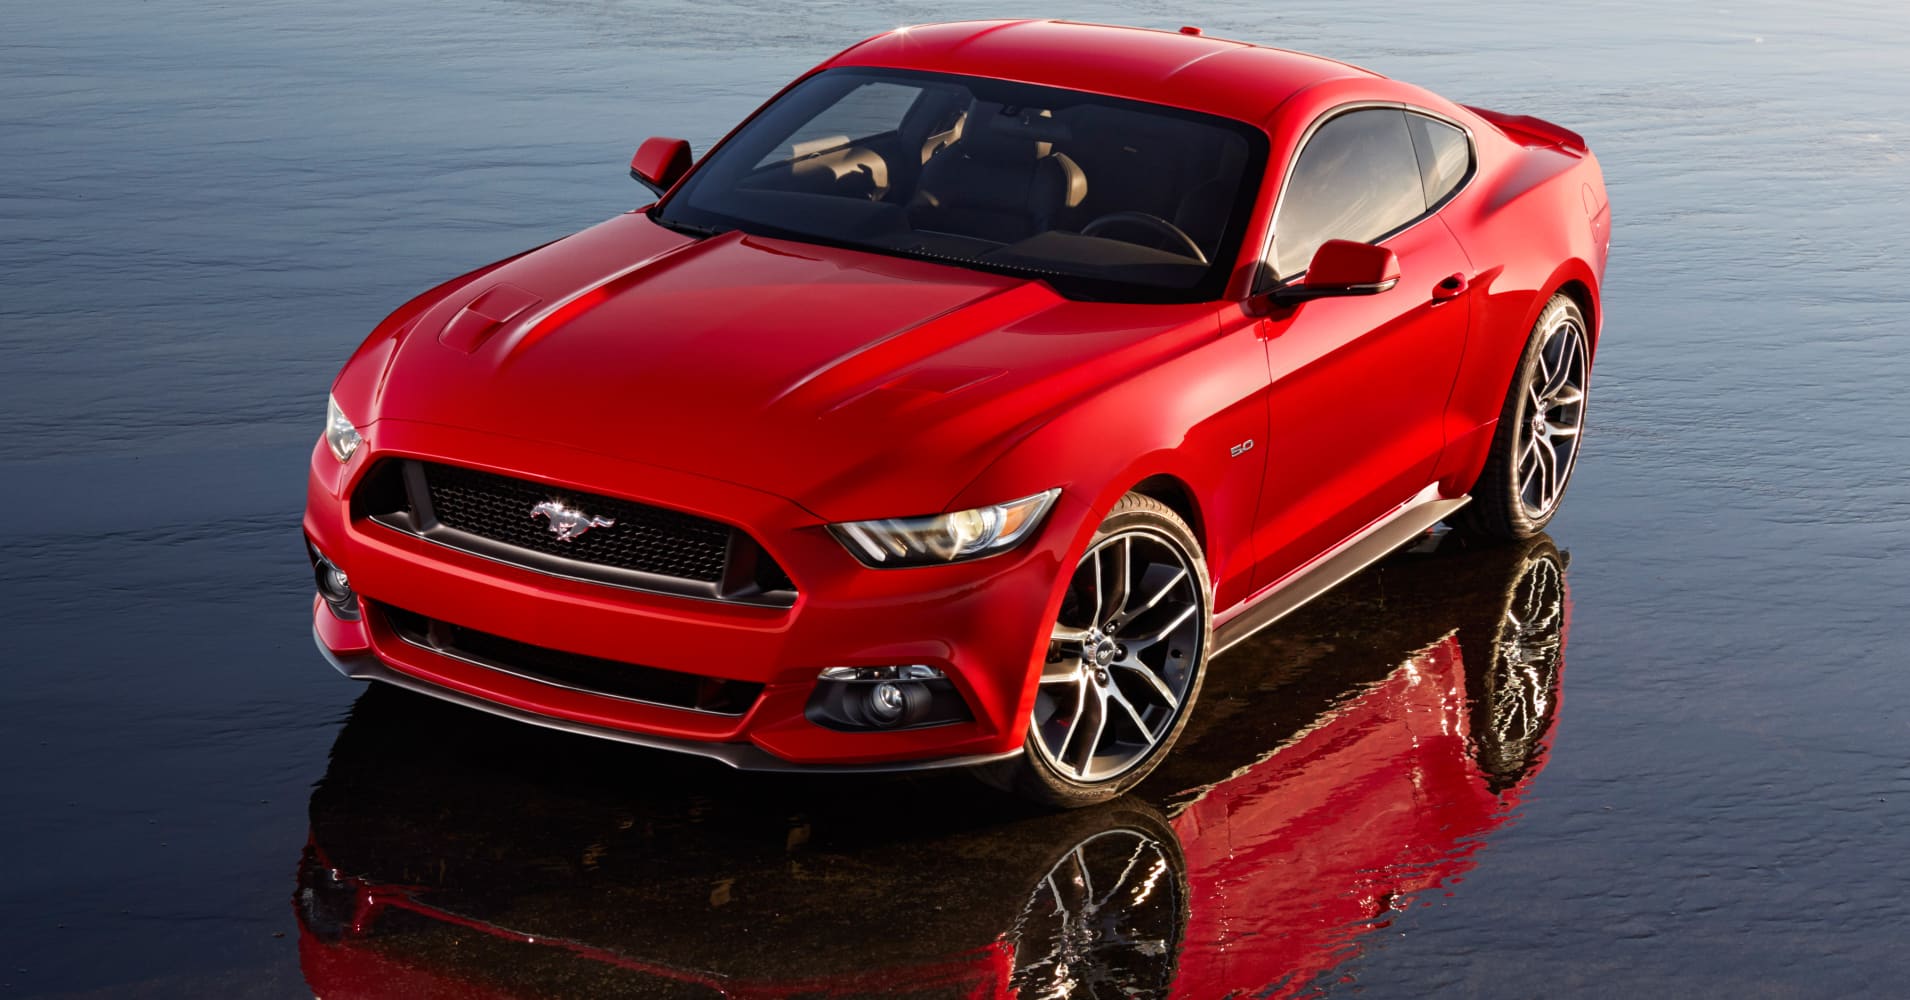 Mustang rides again with new model at age 50